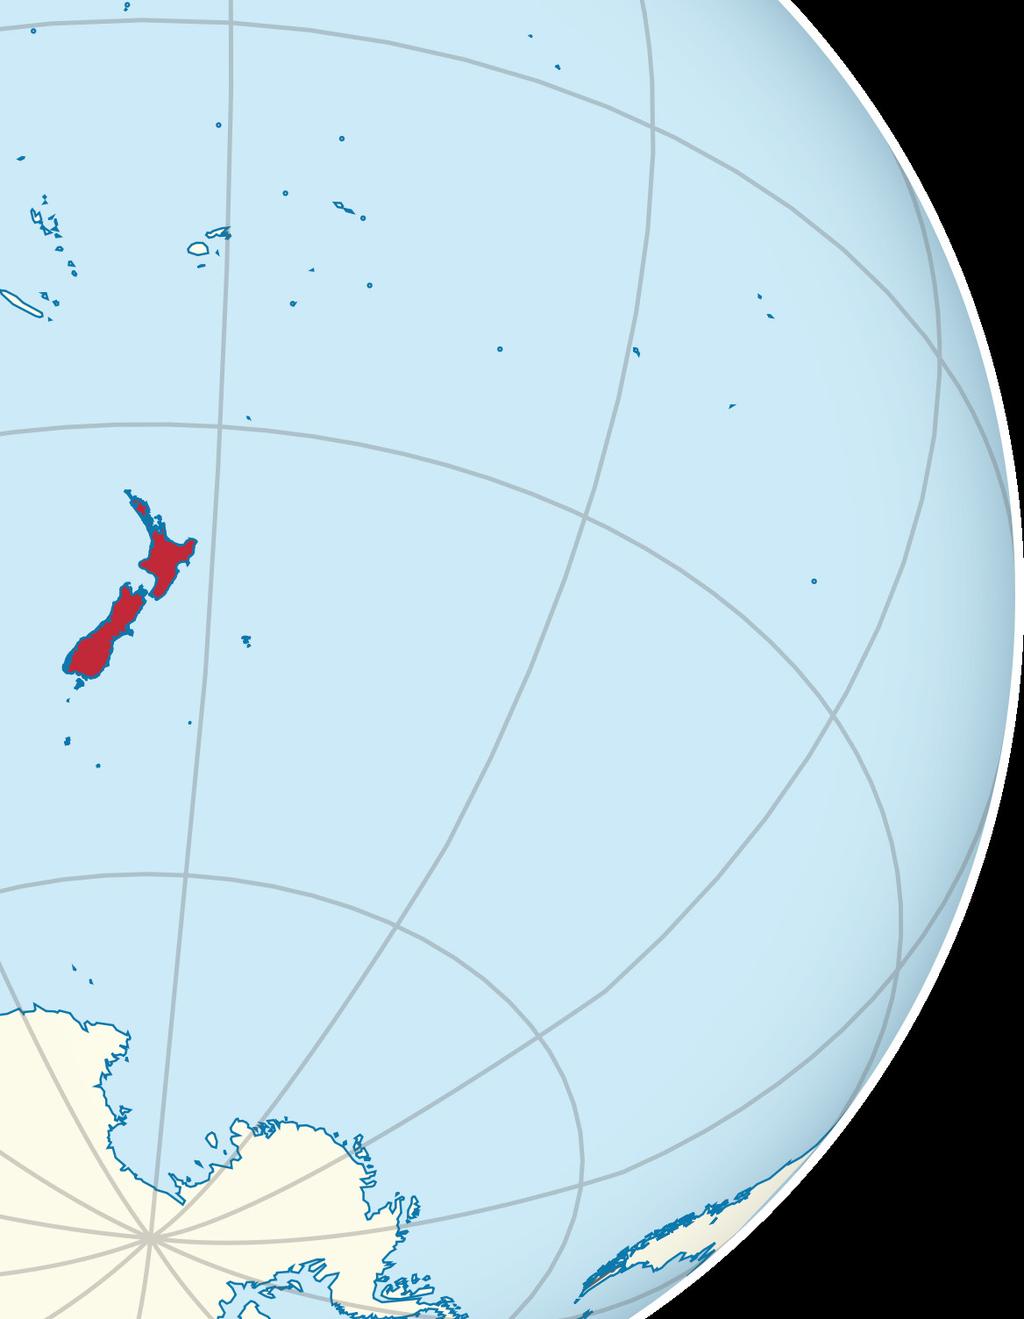 If the tsunami s origin is close to New Zealand.